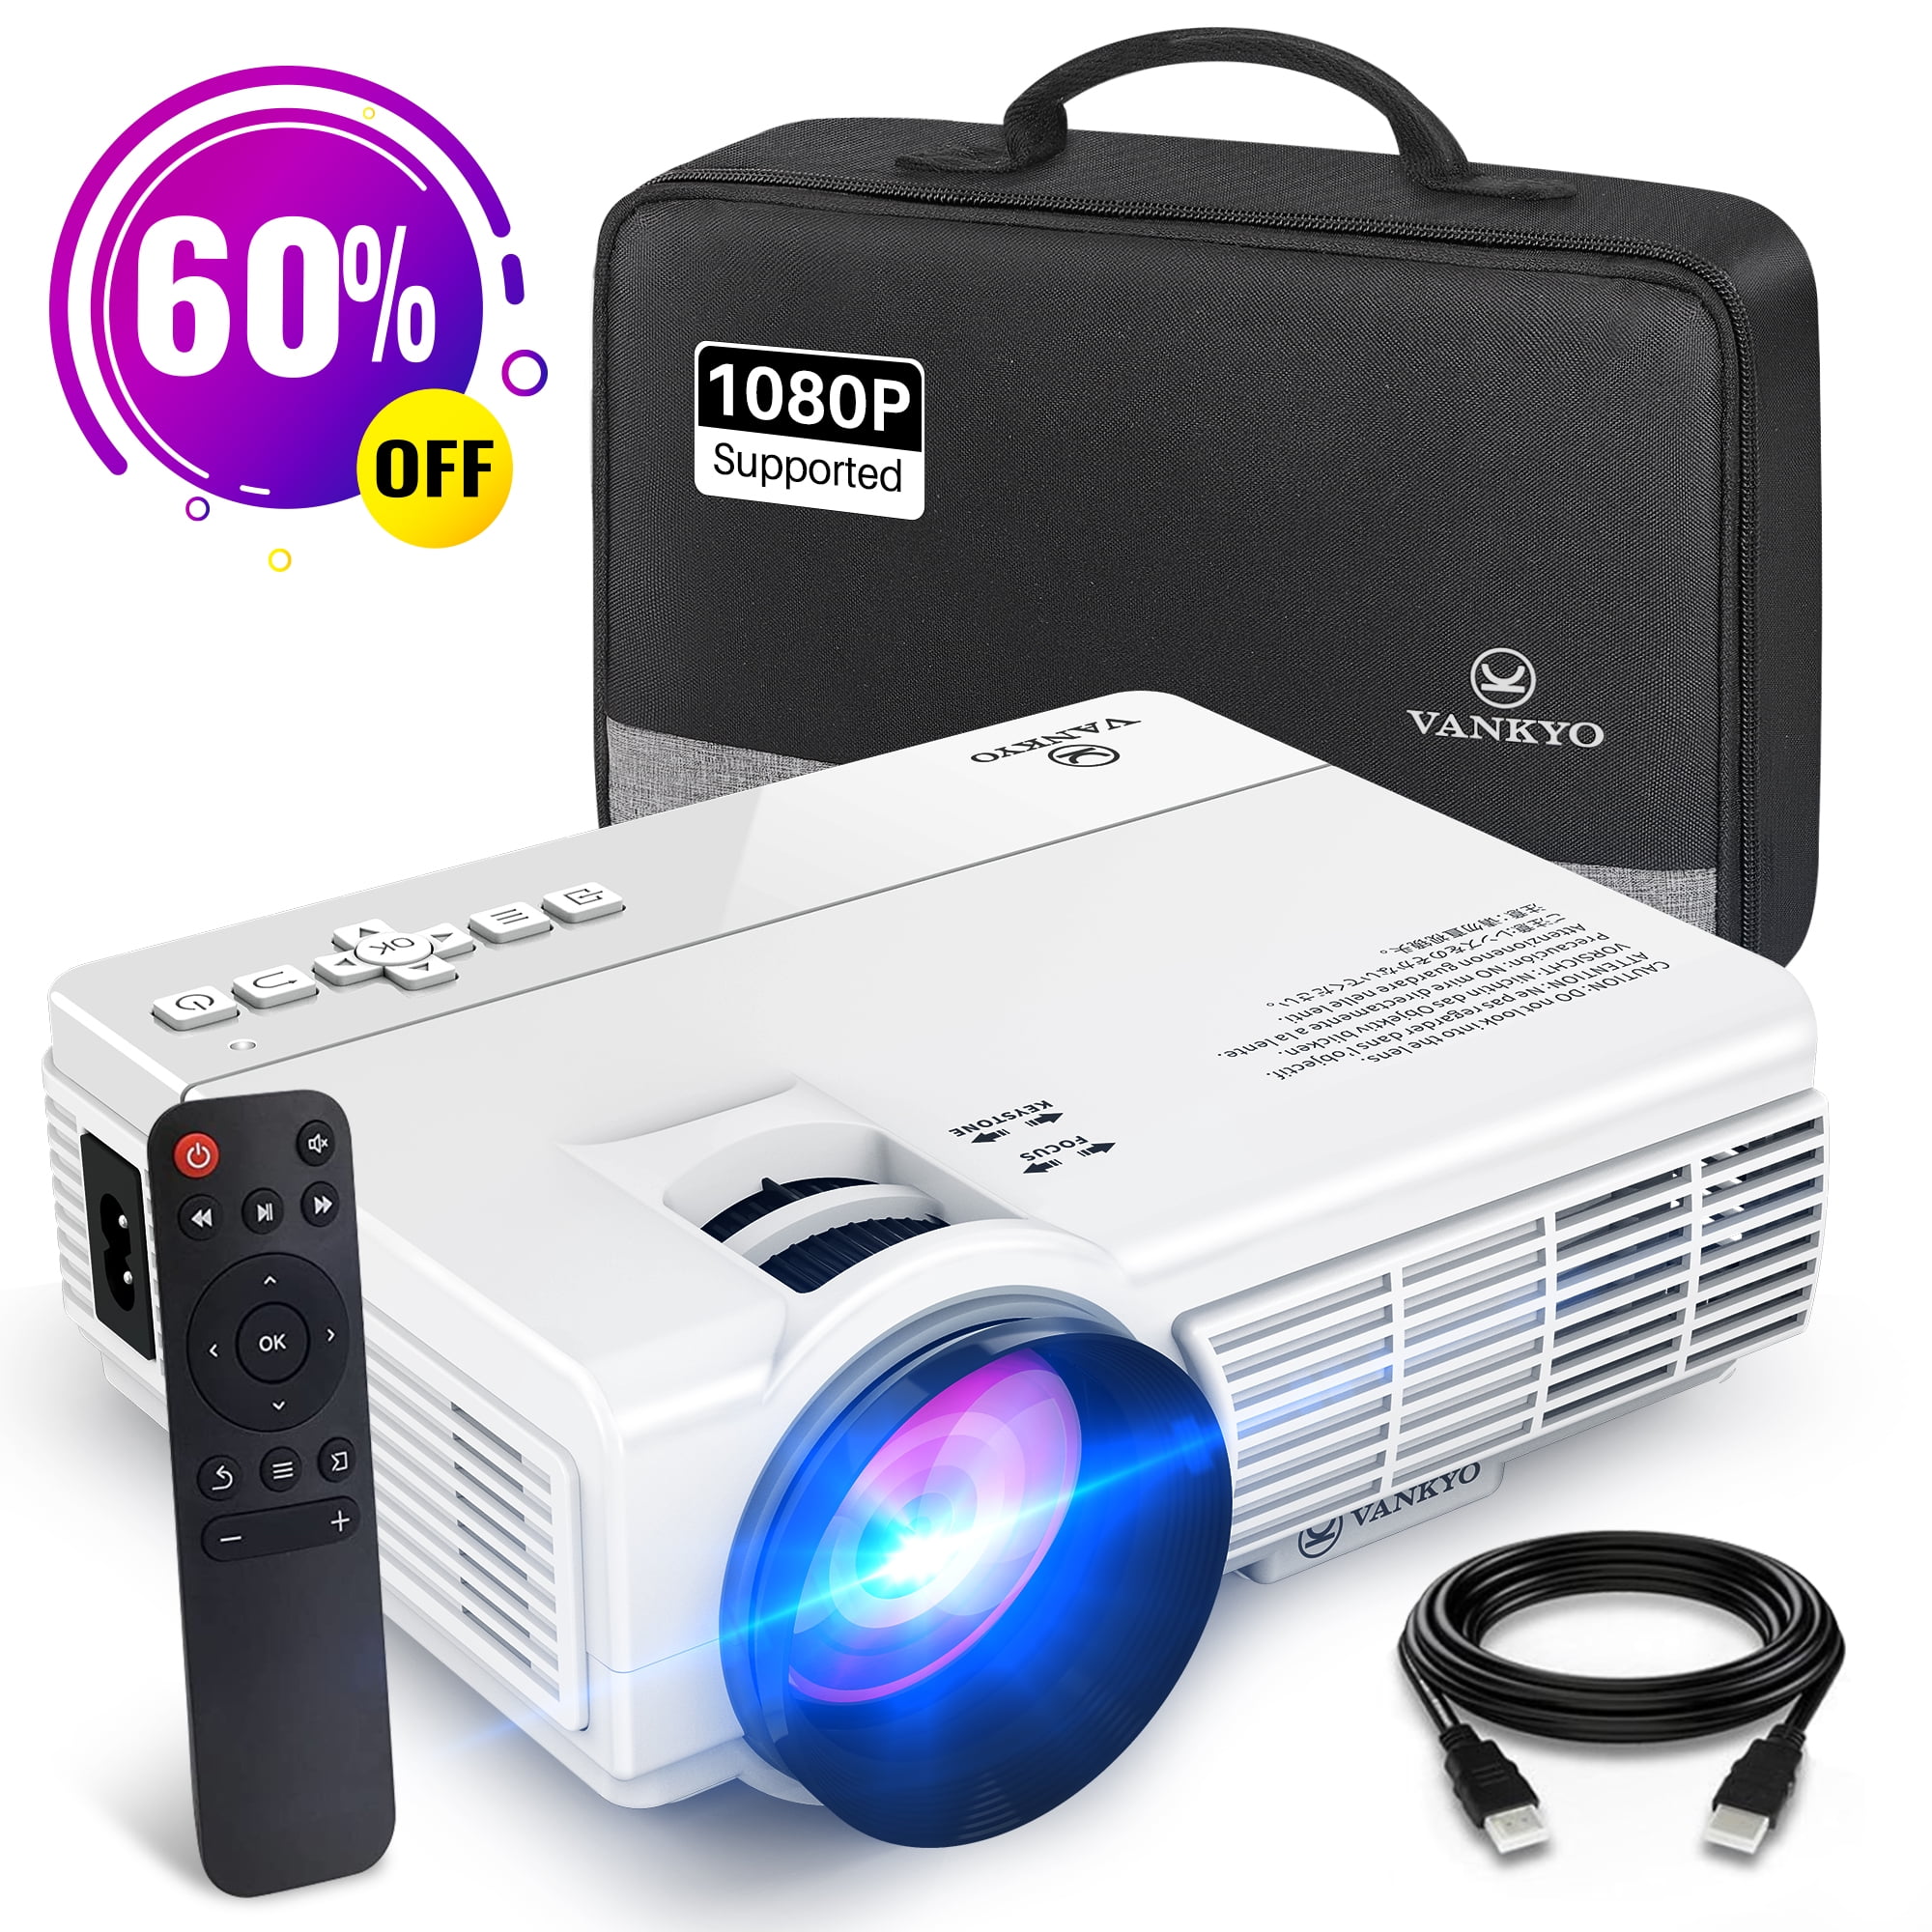 stadig De er Bekendtgørelse VANKYO Leisure 3 1080P Supported Mini Projector with 65000 Hours Lamp Life,  LED Portable Projector Support 200'' Display, Compatible with TV Stick,  PS4, HDMI, VGA, TF, AV and USB (White) - Walmart.com